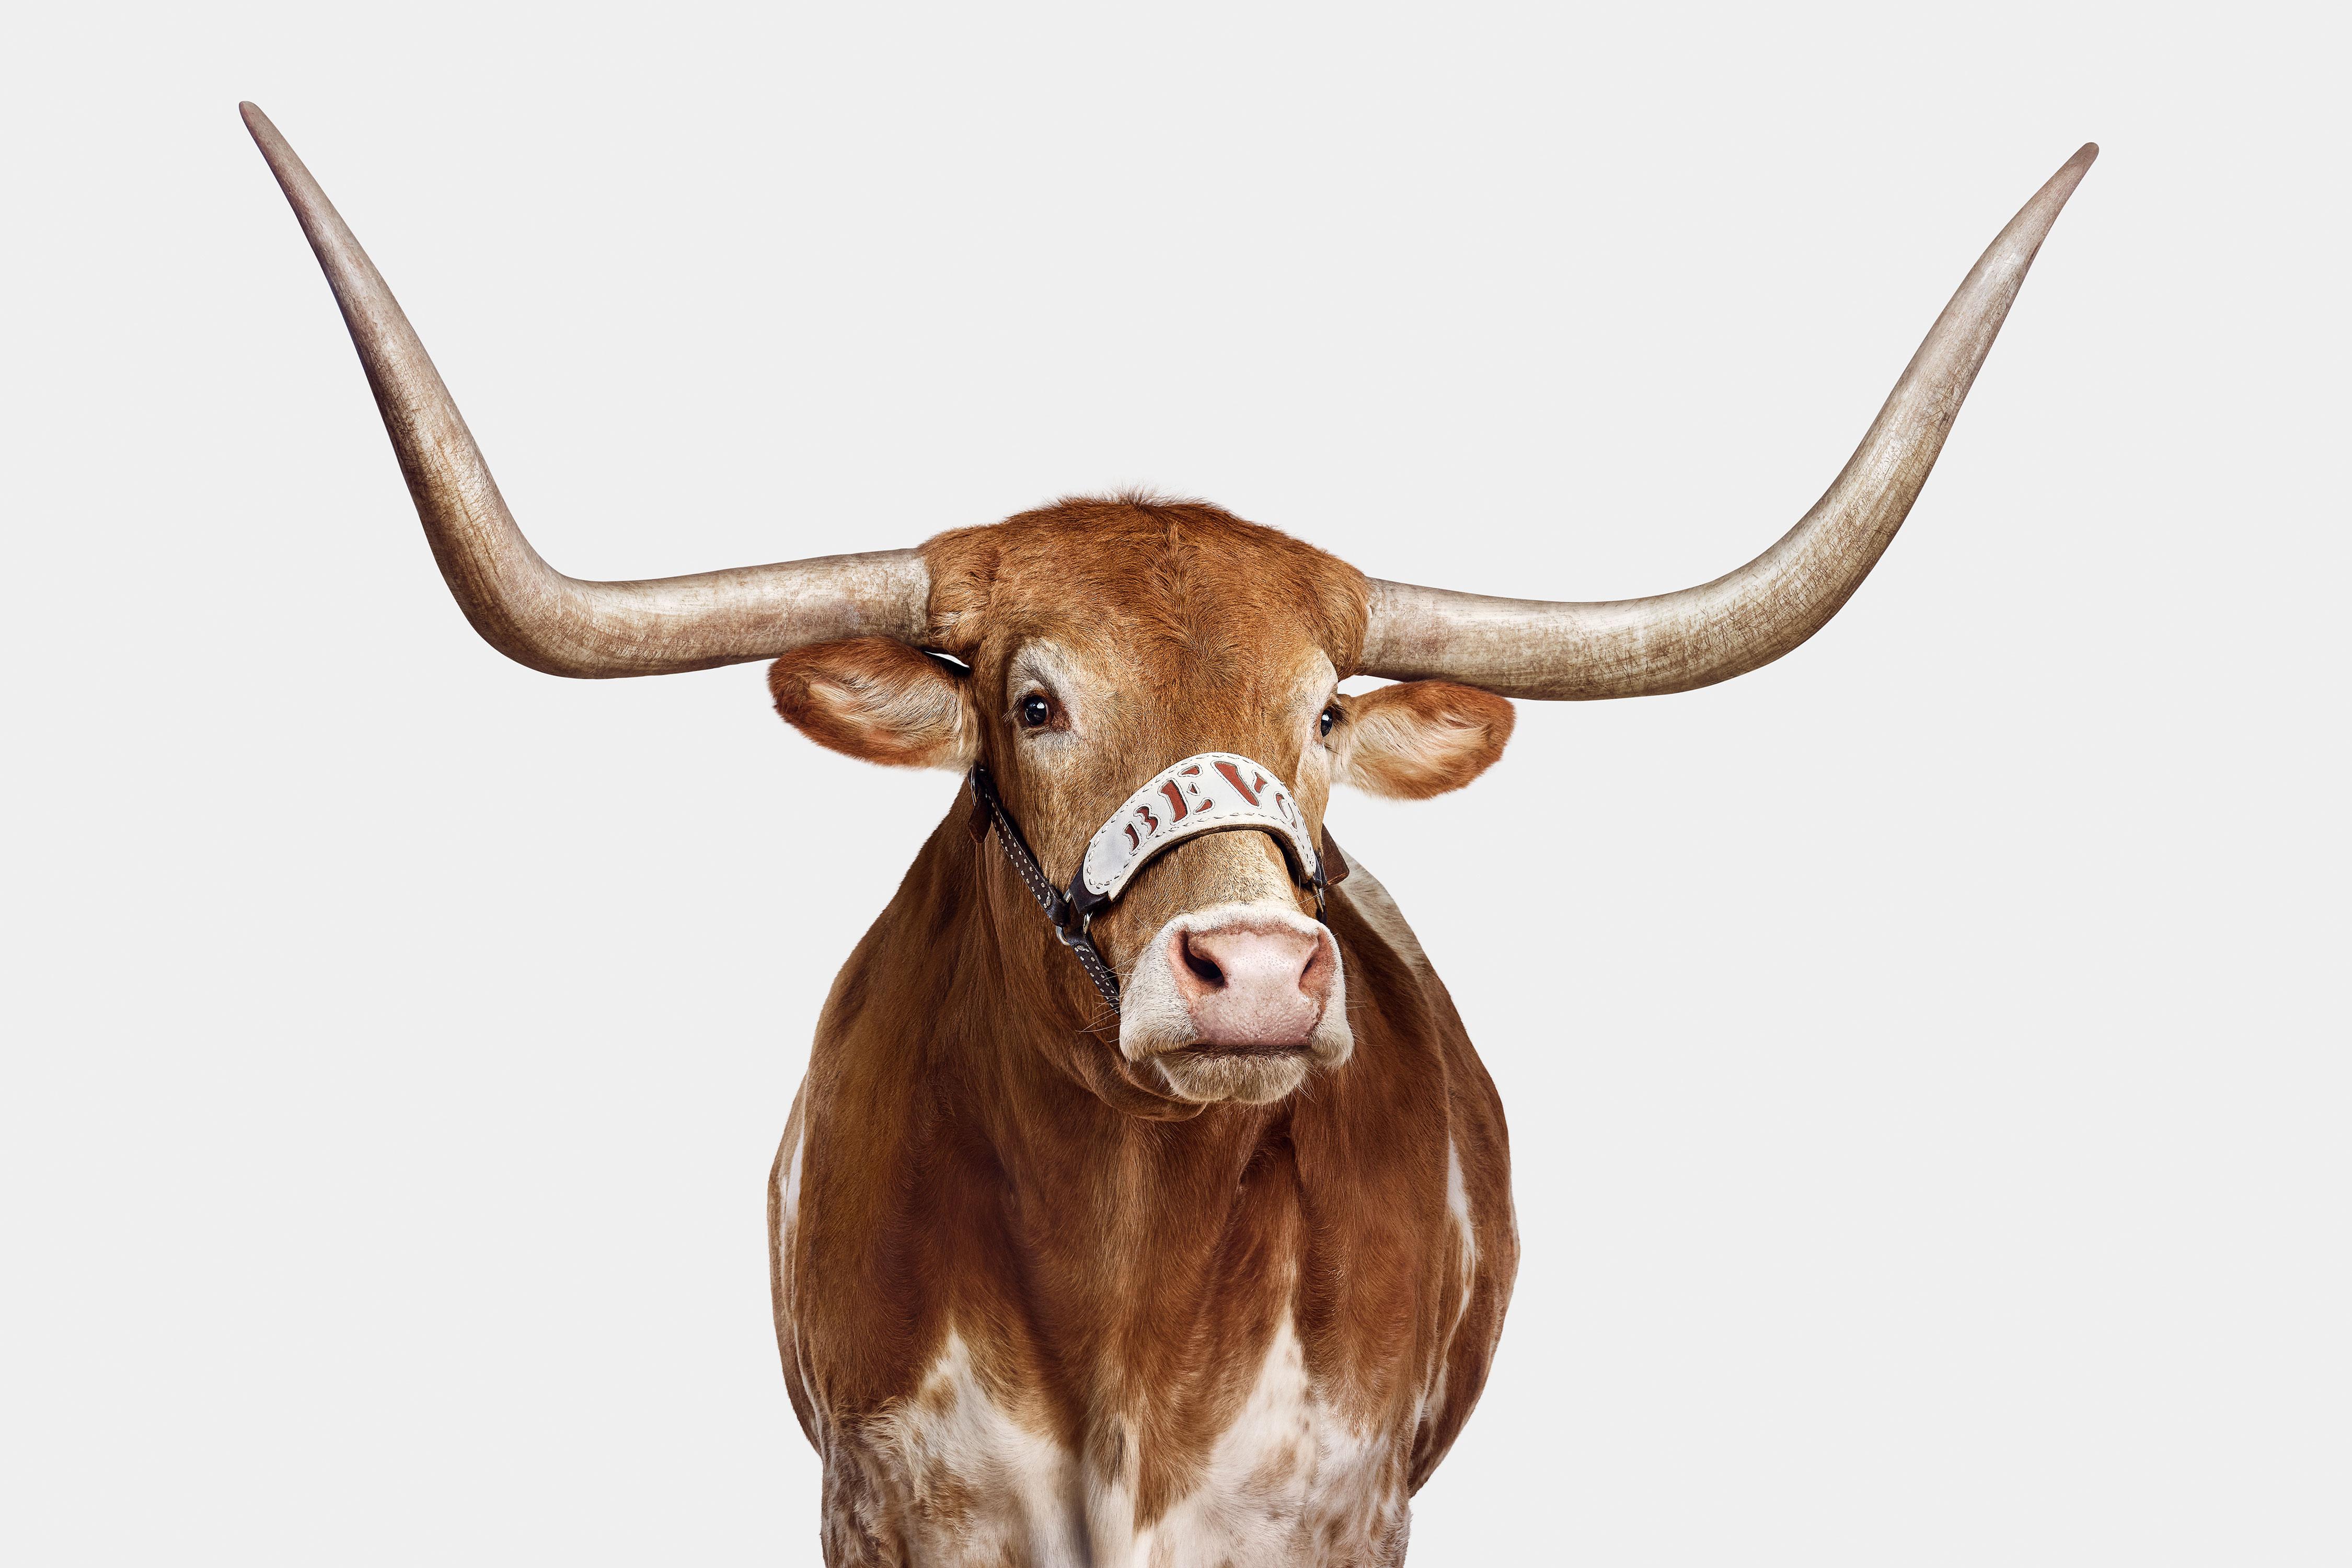 "What an honor it was to photograph the University of Texas mascot, Bevo XV, when he was a short-horned calf in 2016. At that time, I thought how great it would be if I had the opportunity to come back and photograph him after his horns grew into